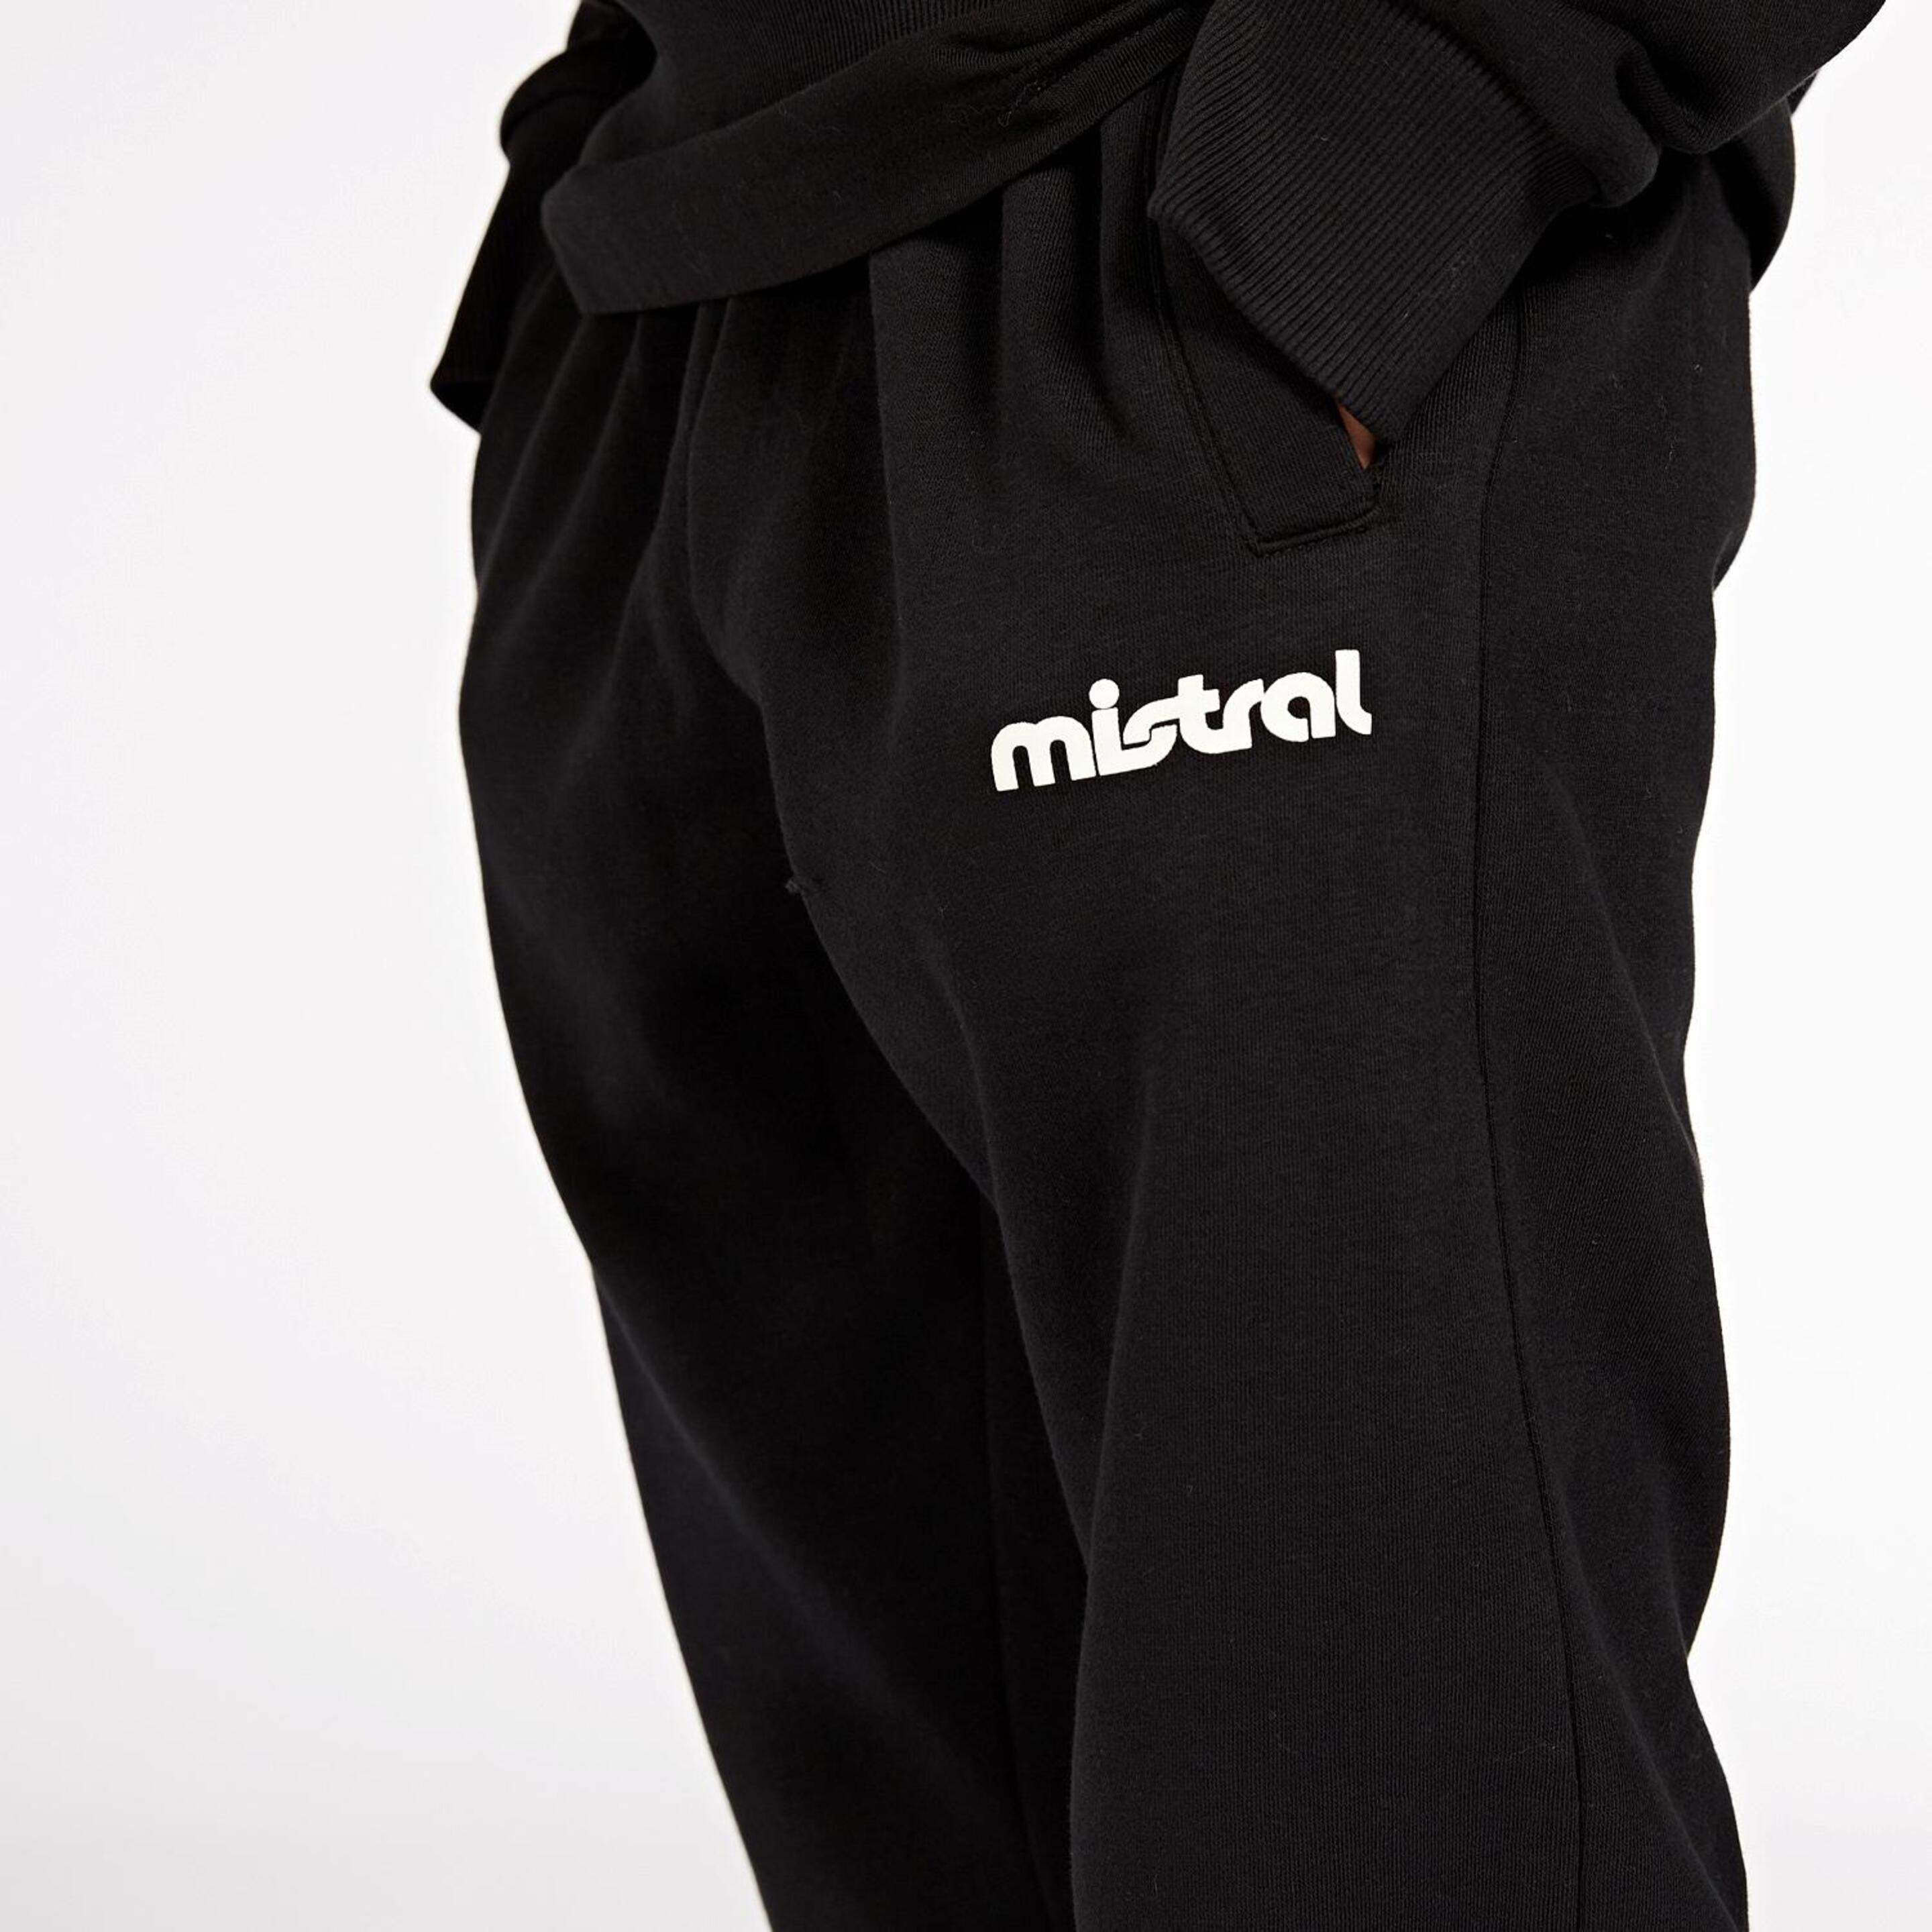 Mistral Rogue